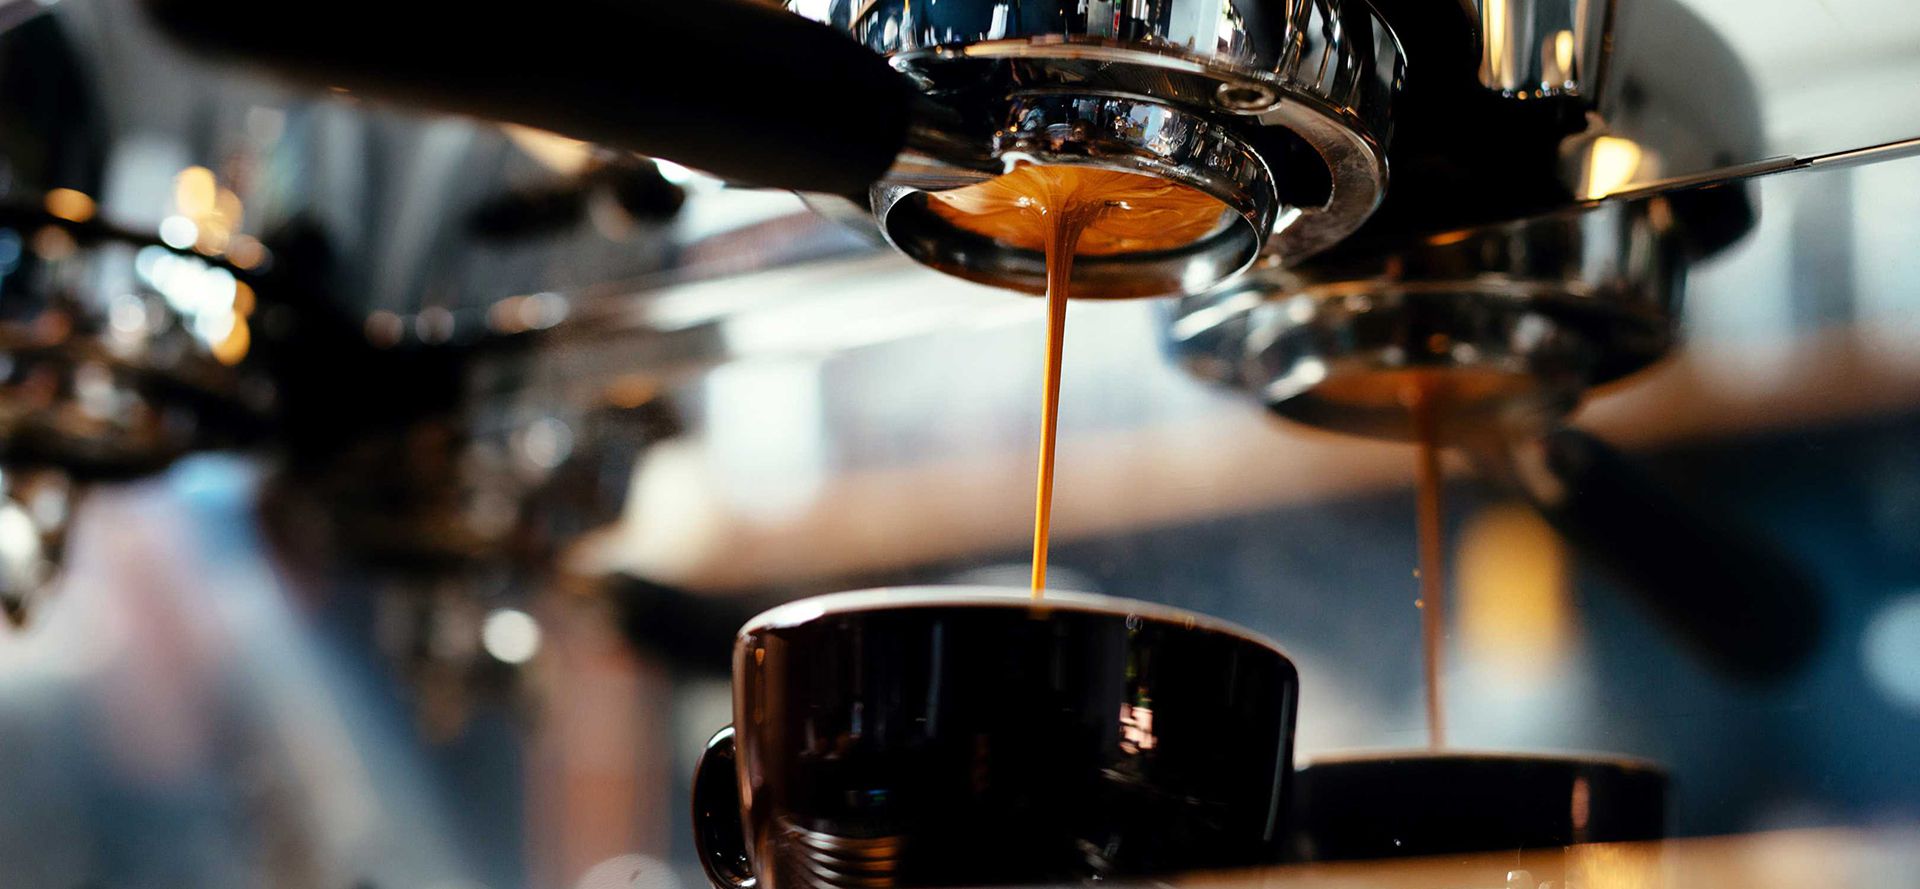 How To Make The Best Espresso.